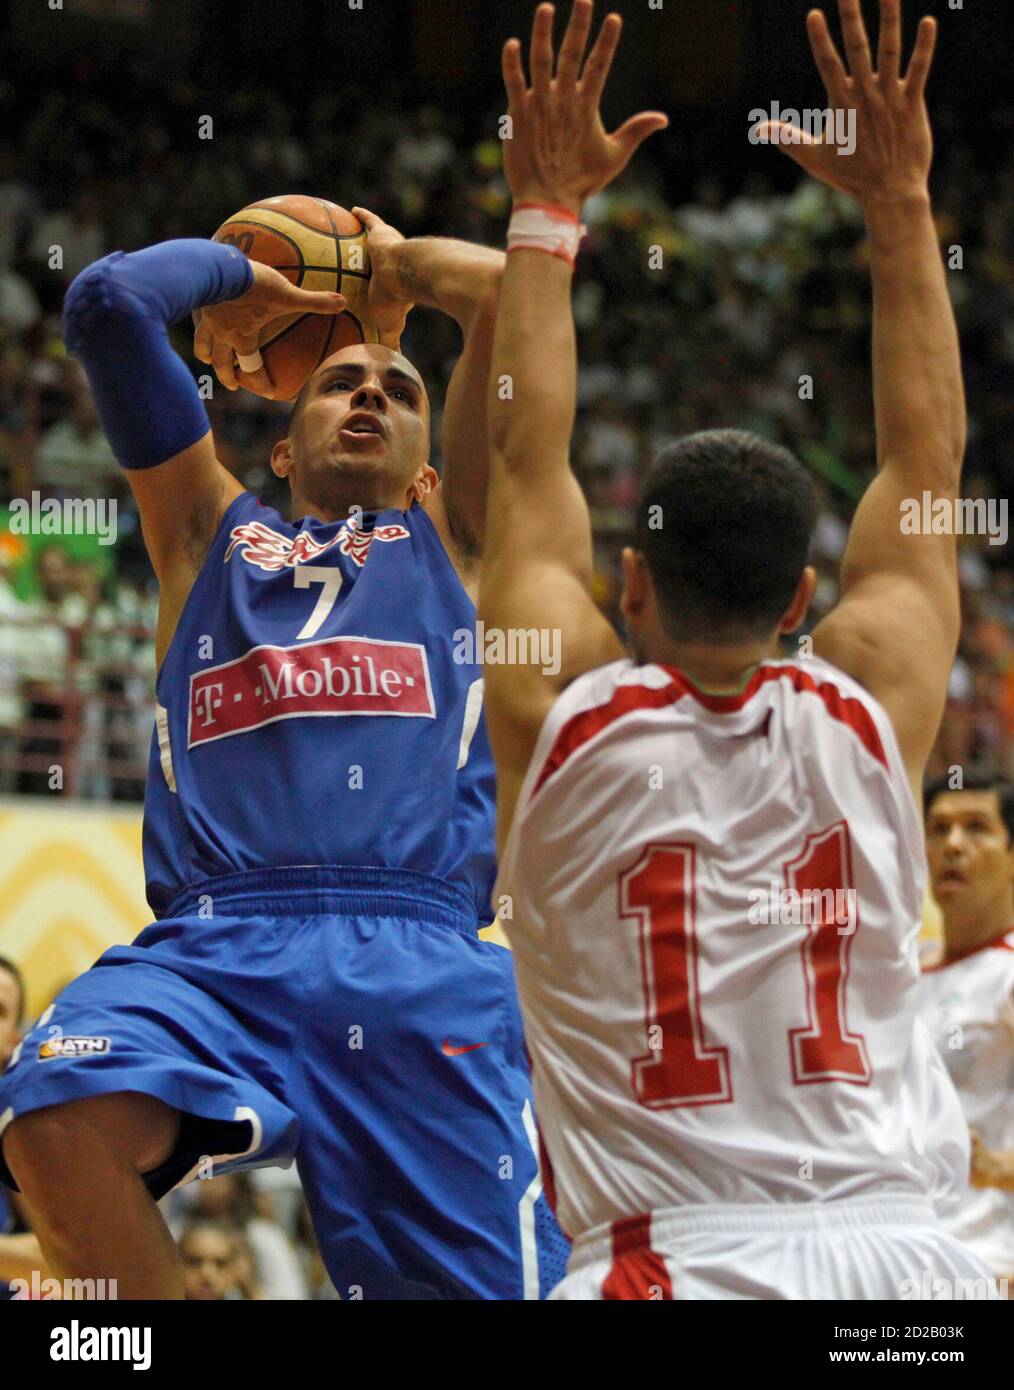 Carlos Arroyo of Puerto Rico goes for the basket against Omar Quintero (R)  of Mexico during their men's basketball final at the Central American and Caribbean  Games in Mayaguez, July 30, 2010.